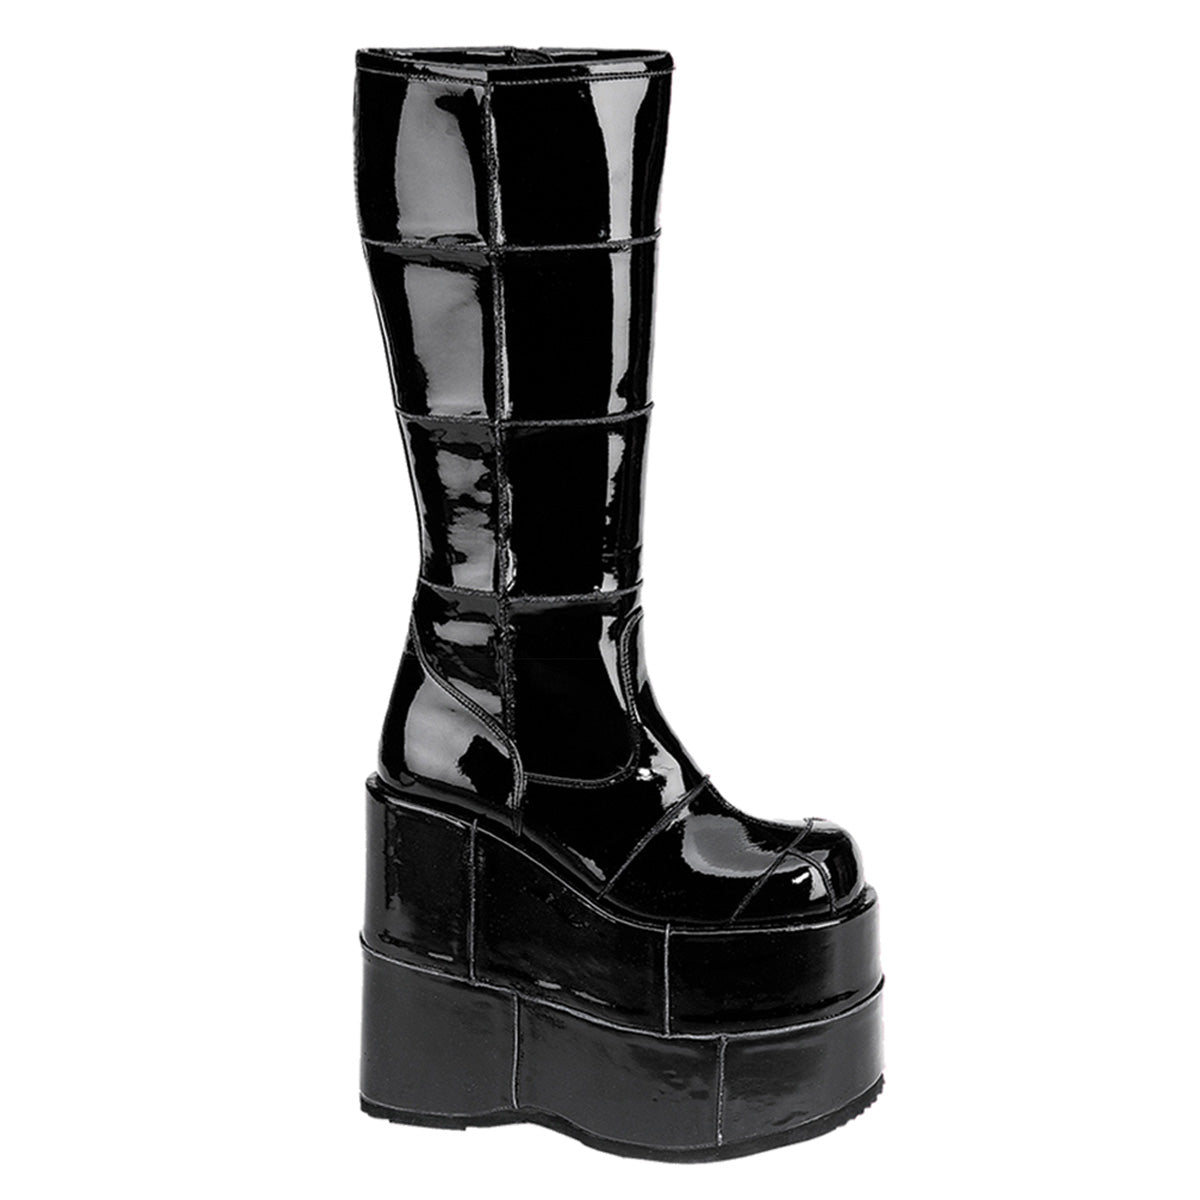 DemoniaCult Mens Boots STACK-301 Blk Pat